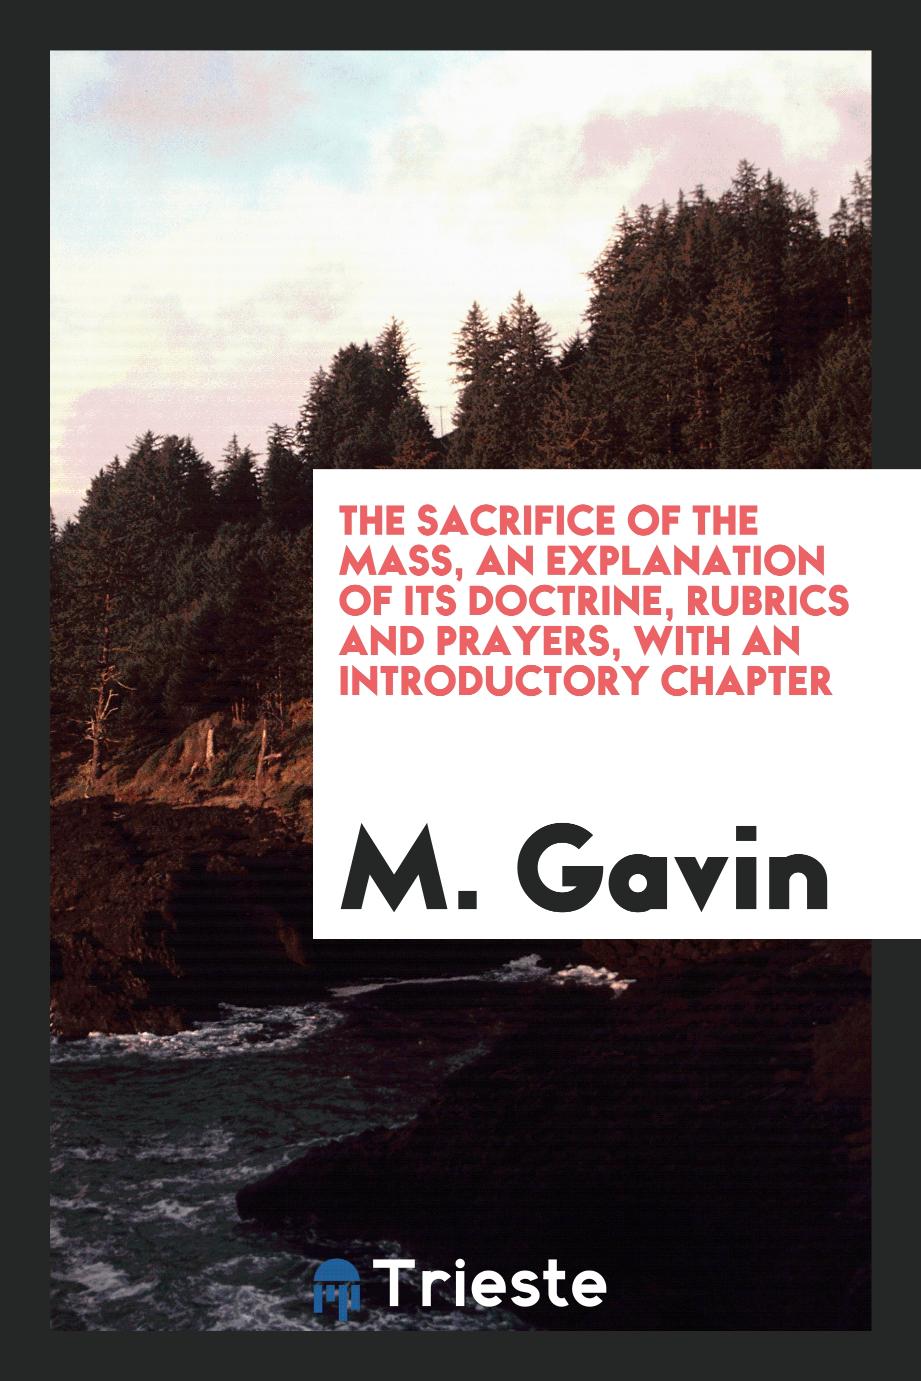 The Sacrifice of the mass, an explanation of its doctrine, rubrics and prayers, with an introductory chapter